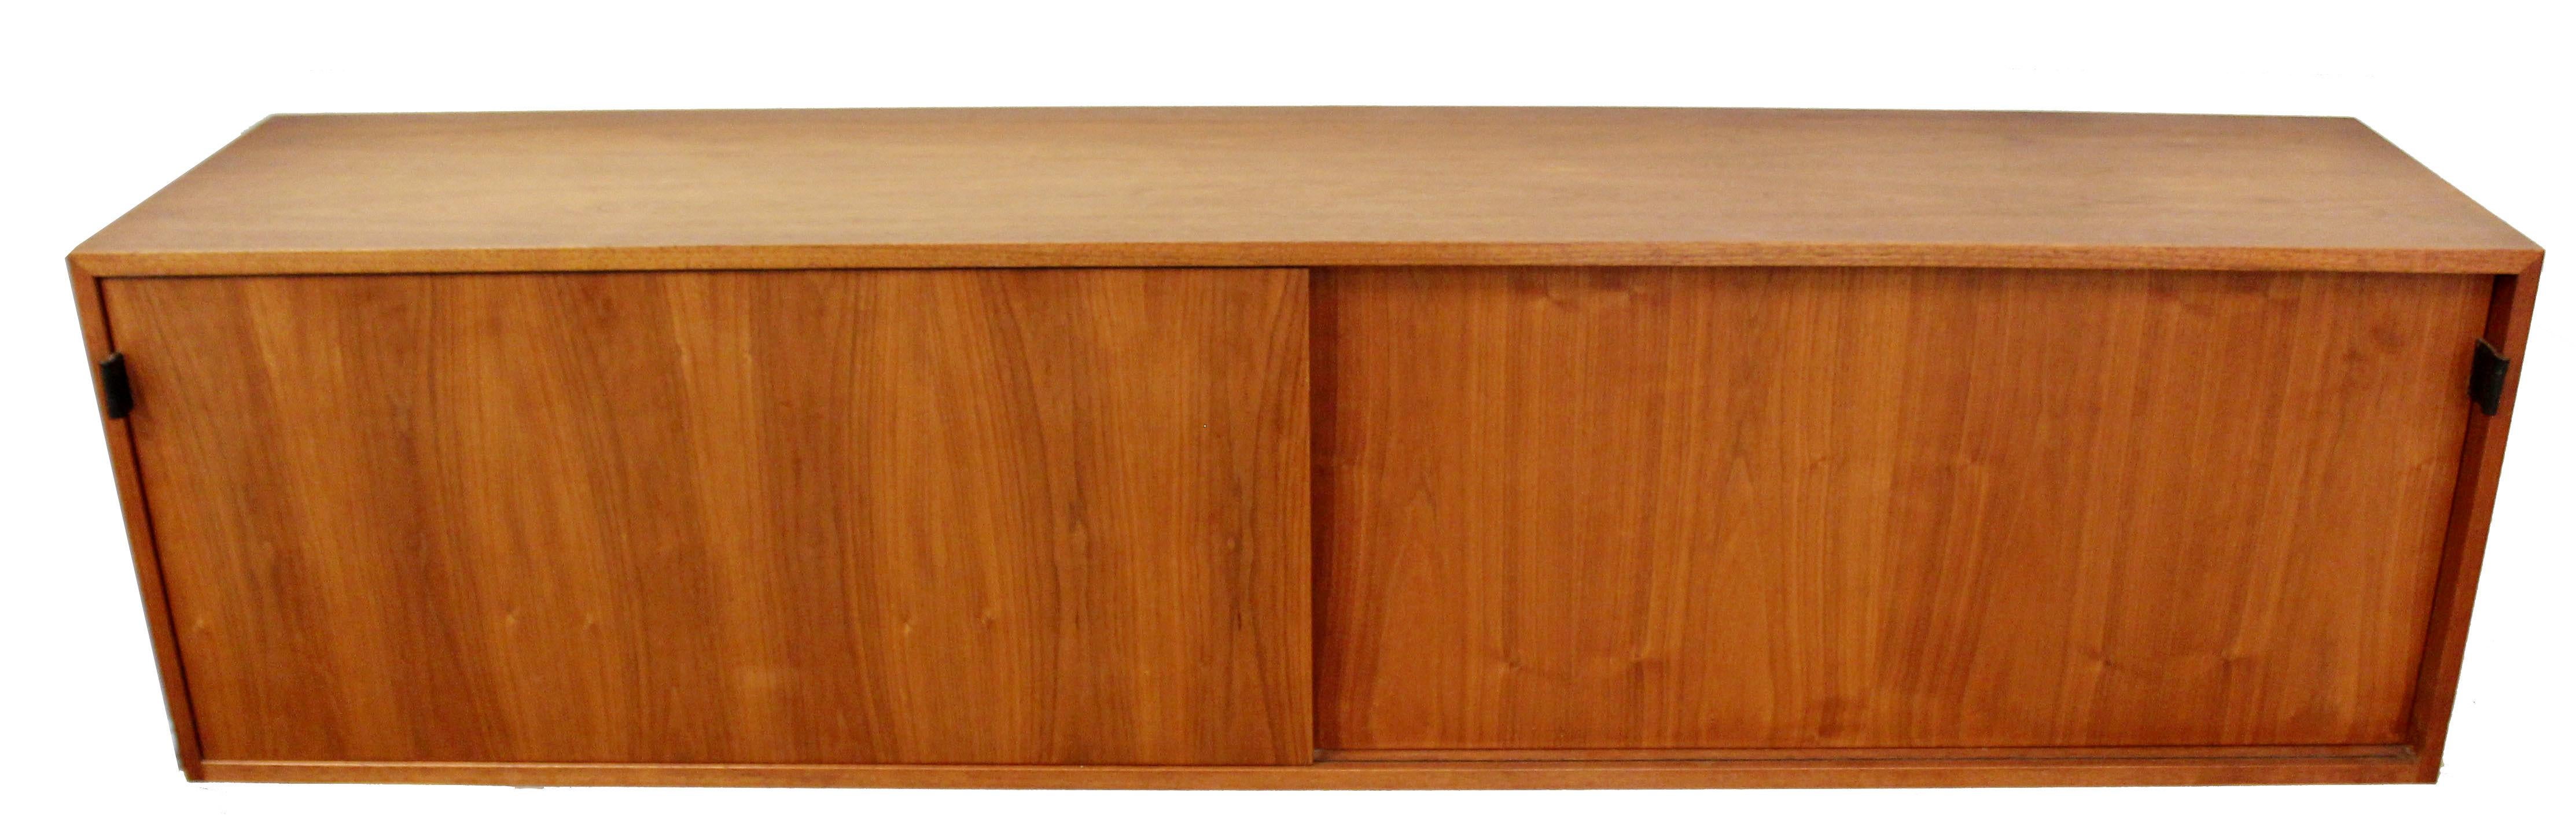 For your consideration is an incredible, floating credenza wall-mounted credenza in walnut wood with sliding doors that reveal four shelves and three drawers, by Knoll, circa the 1960s. Has the original vintage Knoll tag. In excellent condition. The